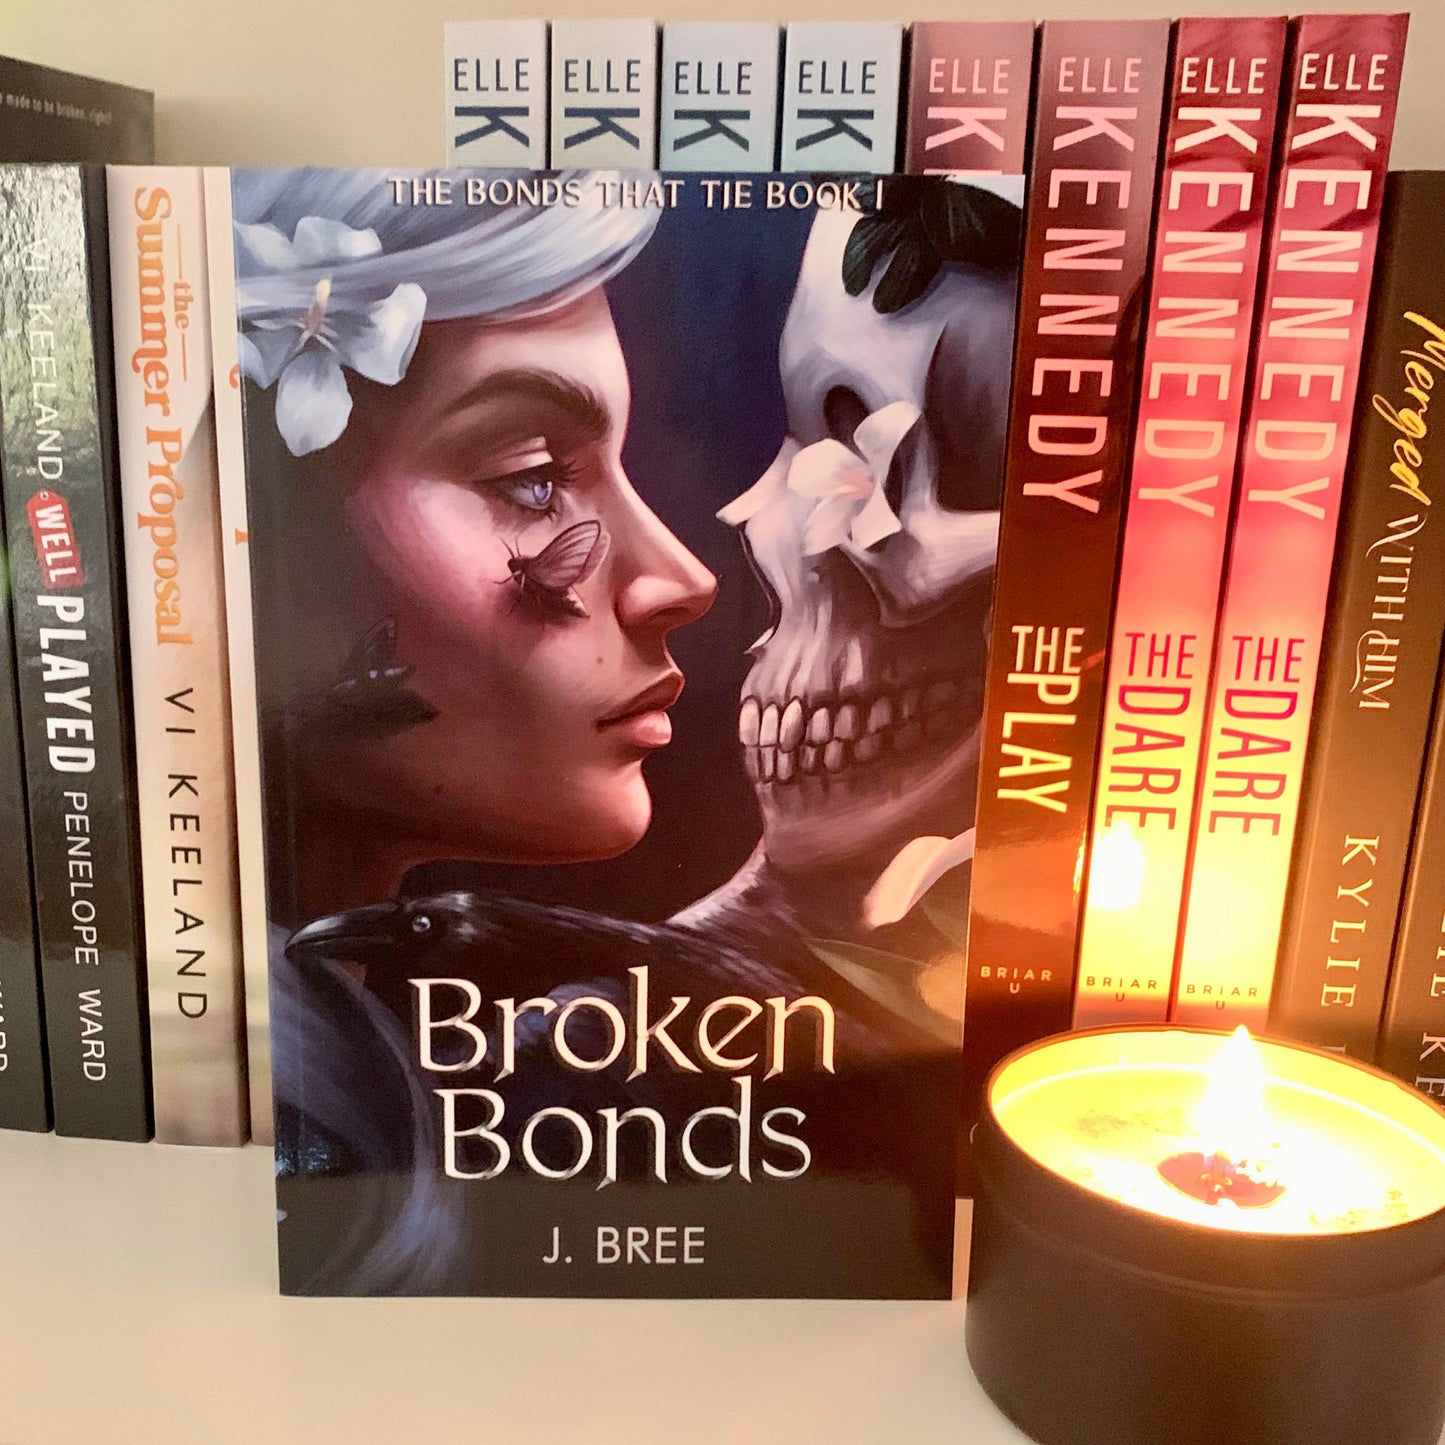 The Bonds that Tie Series by J Bree